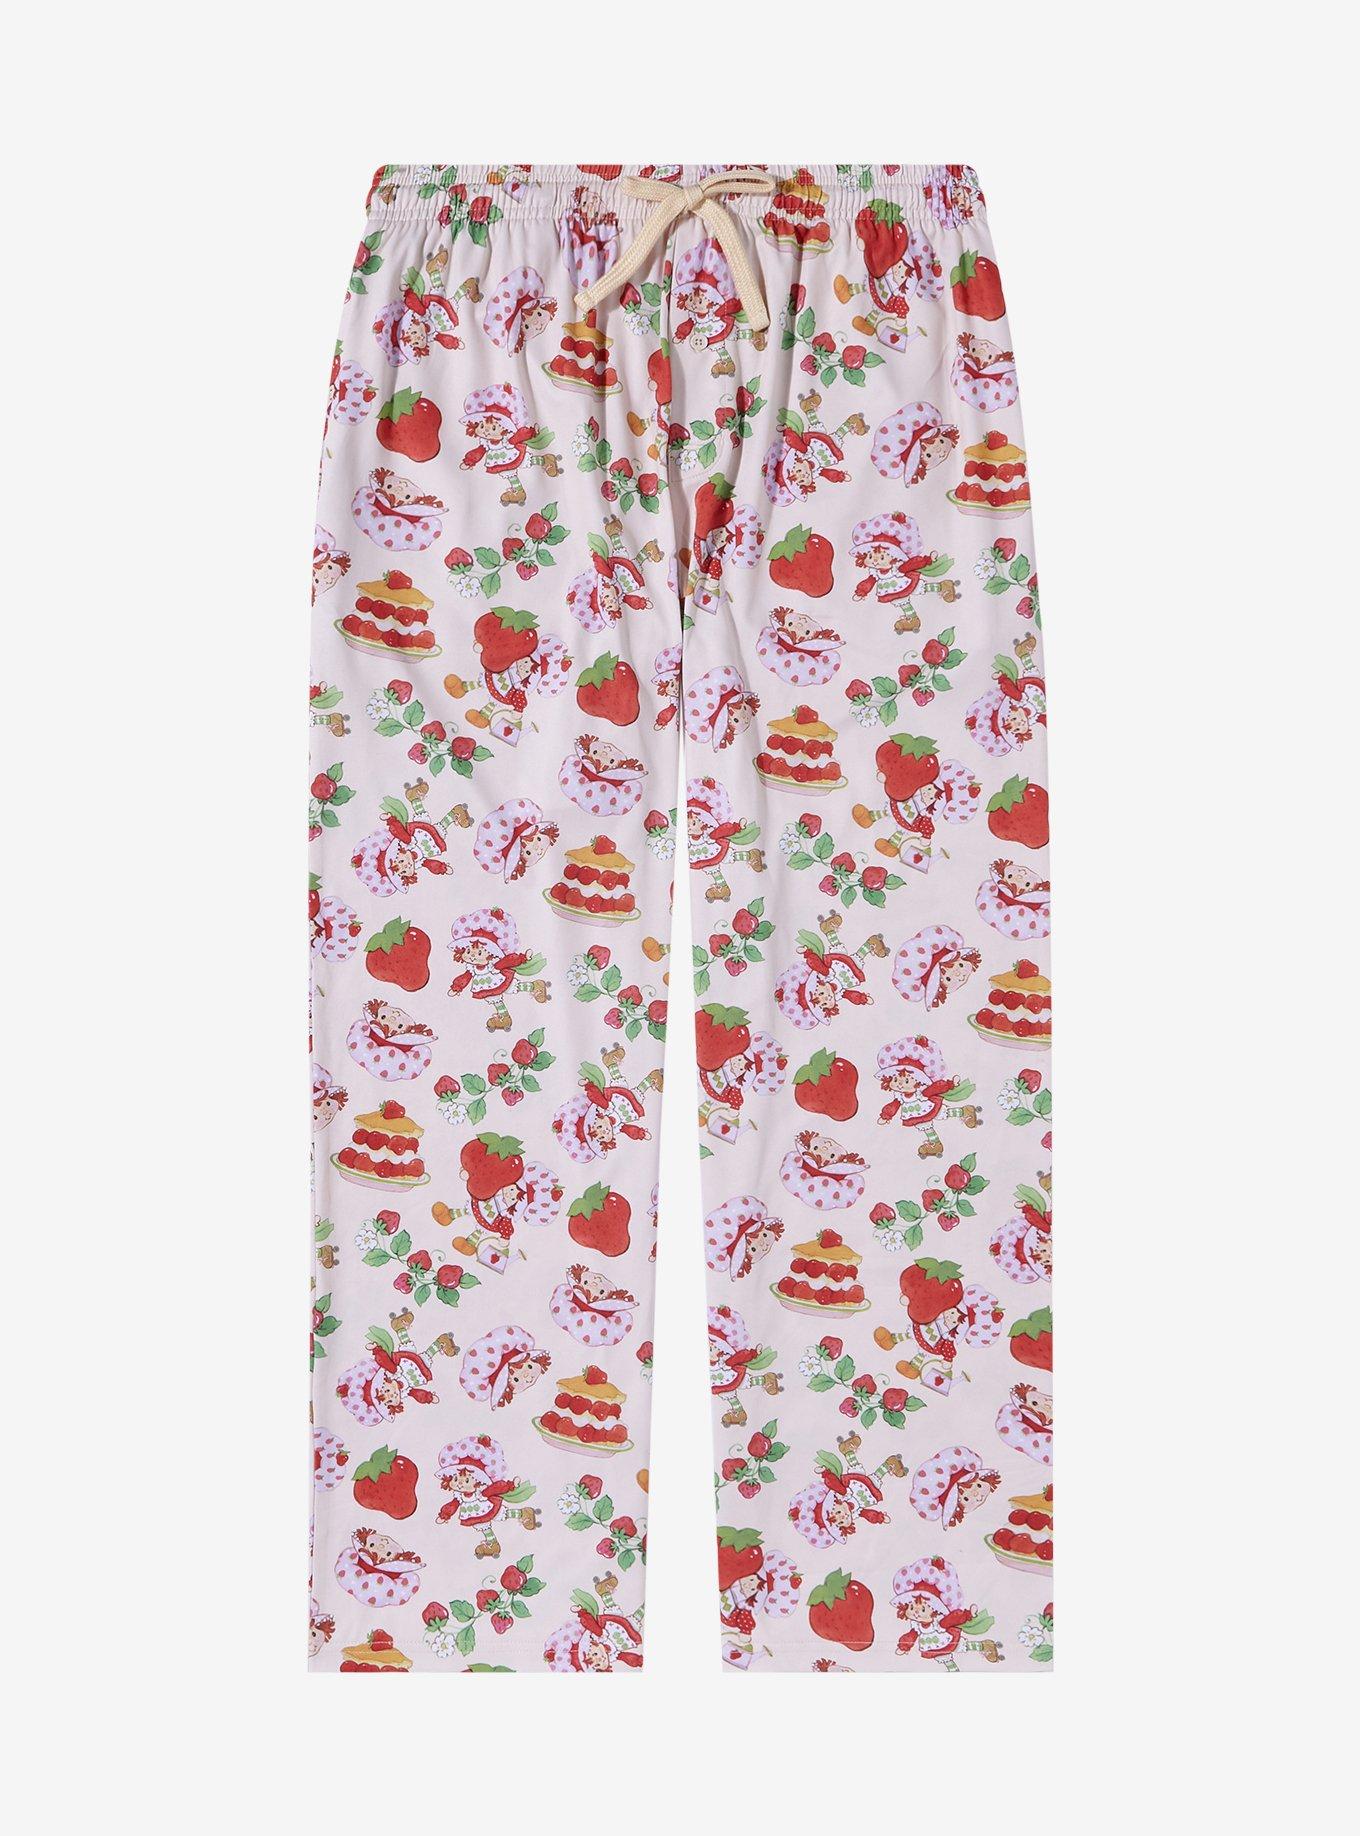 Strawberry Shortcake Icons Allover Print Women's Plus Size Sleep Pants - BoxLunch Exclusive, CREAM, hi-res